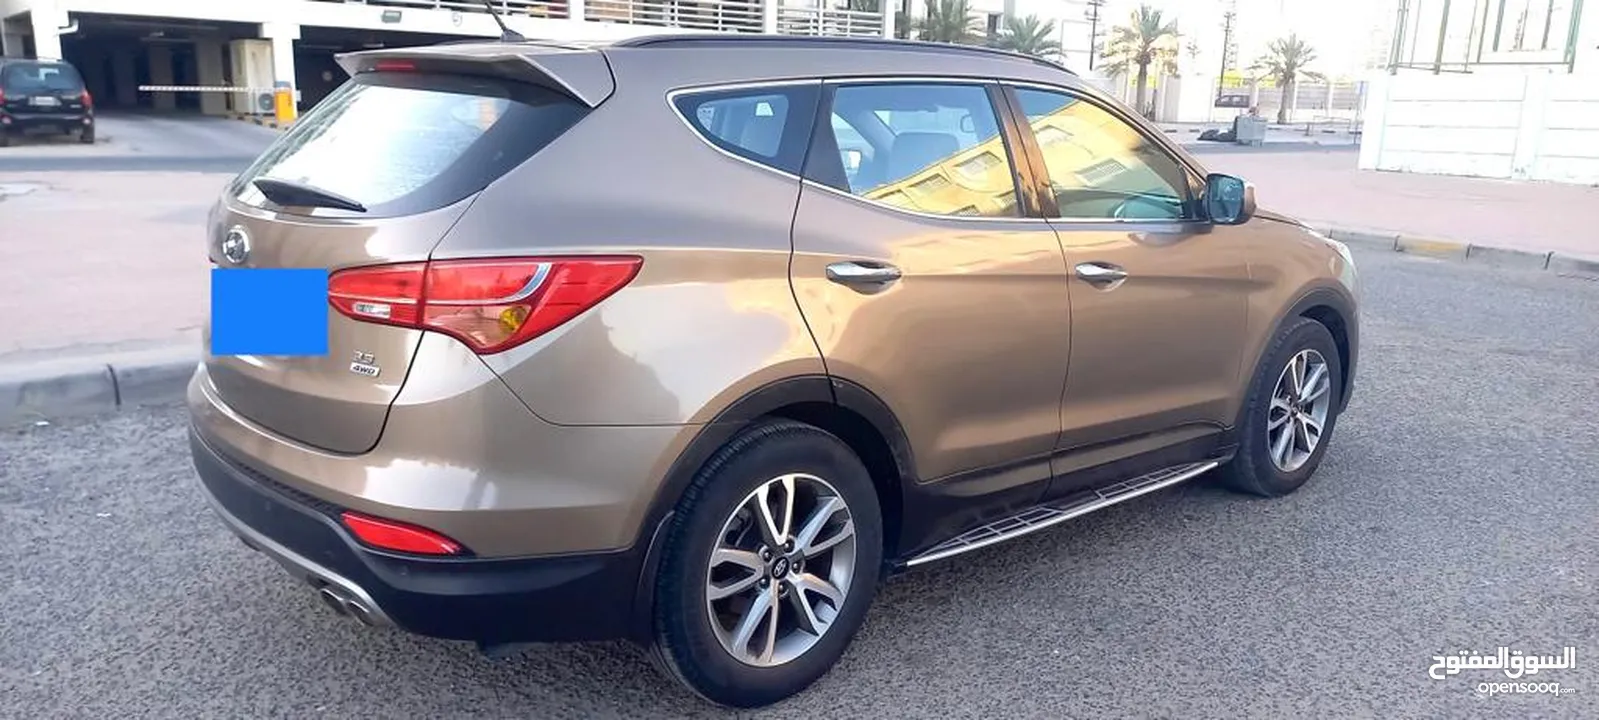 Hyundai SantaFe 2015 available with Low Mileage